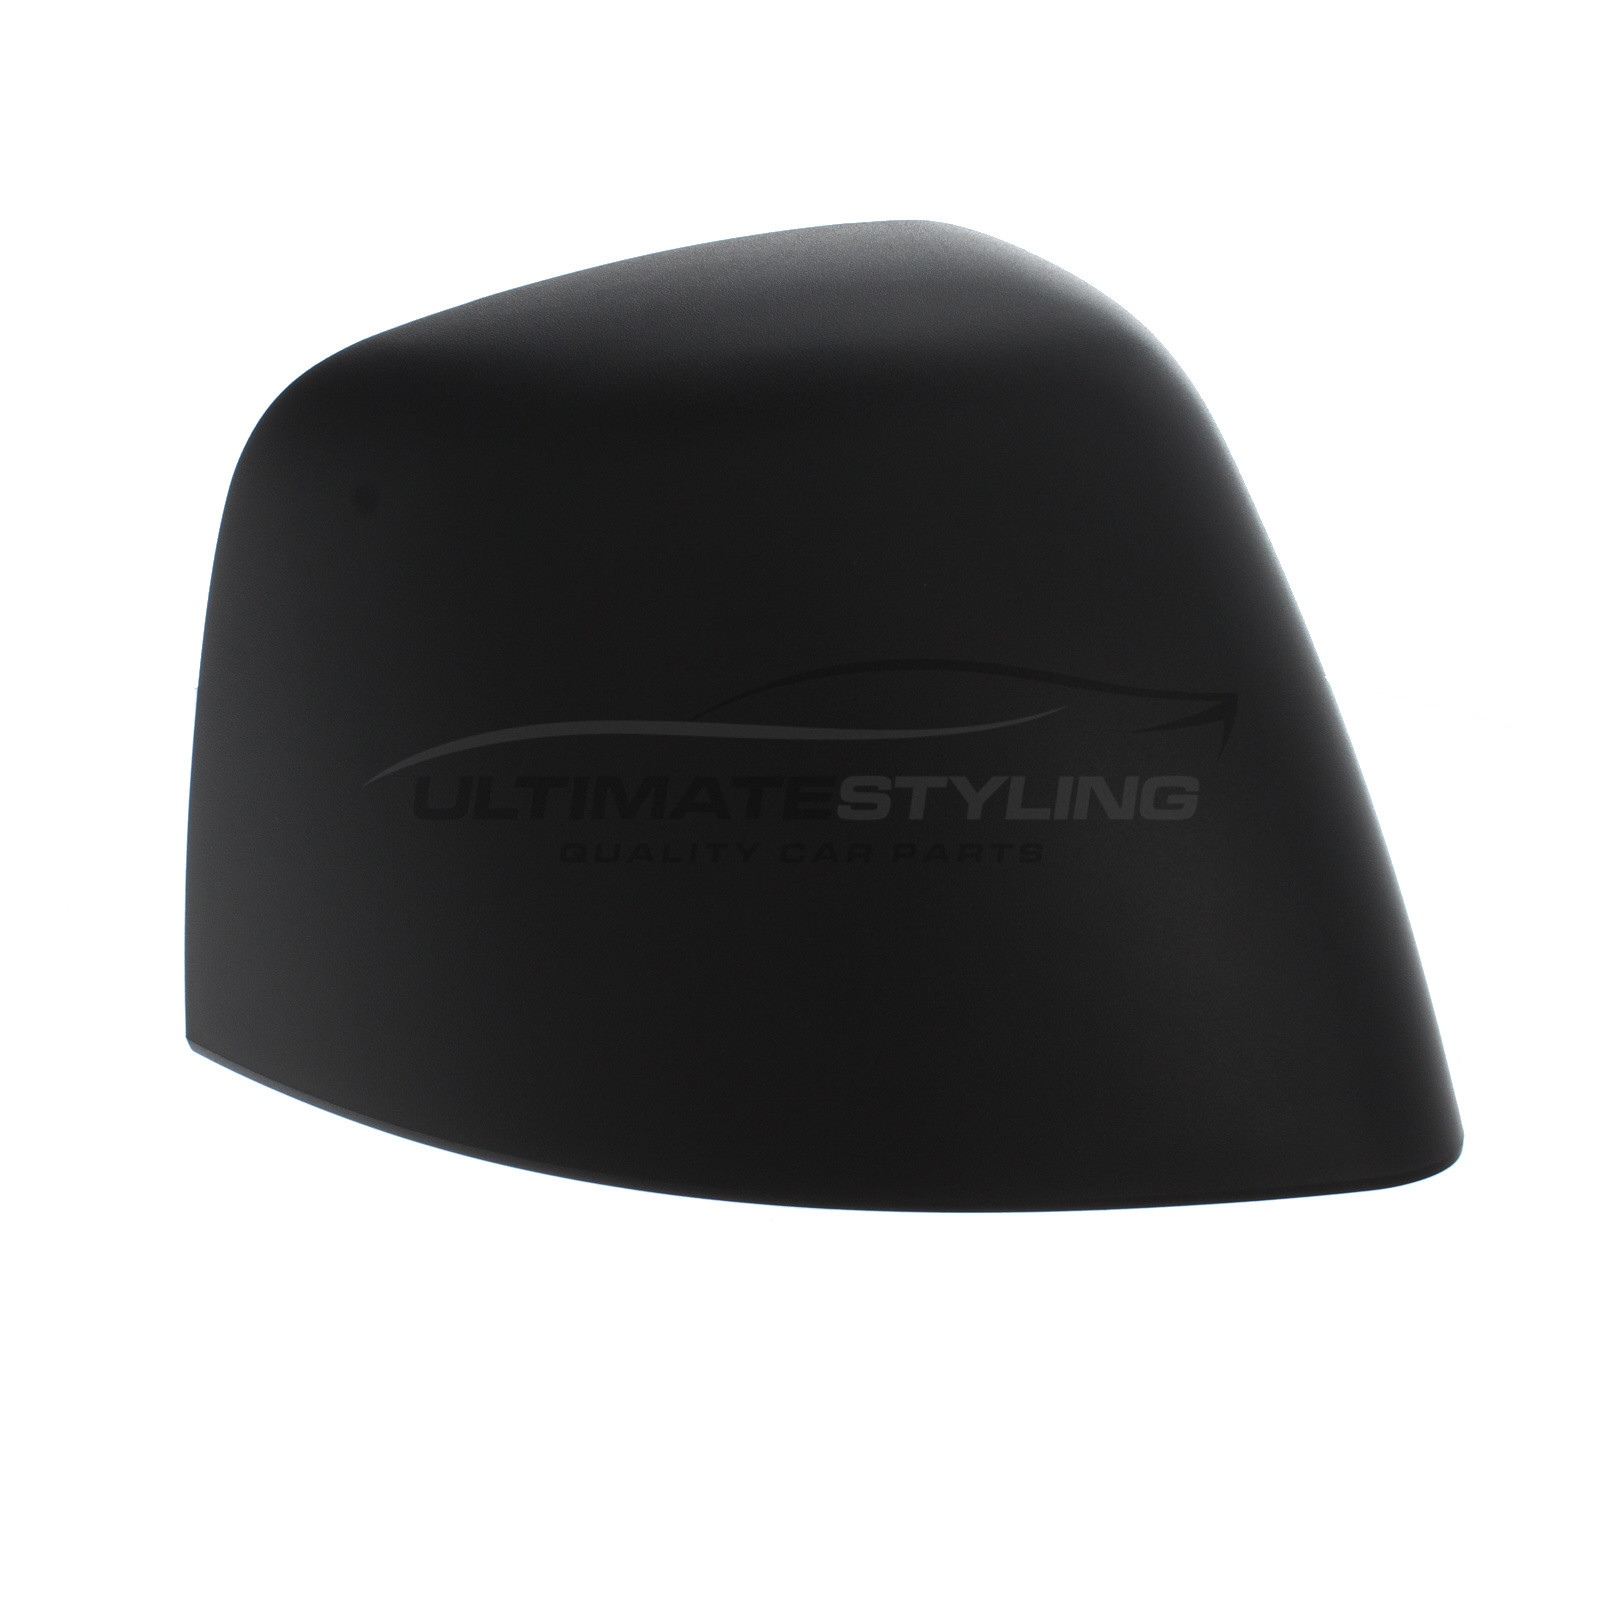 Wing Mirror Cover for Ford Transit Connect